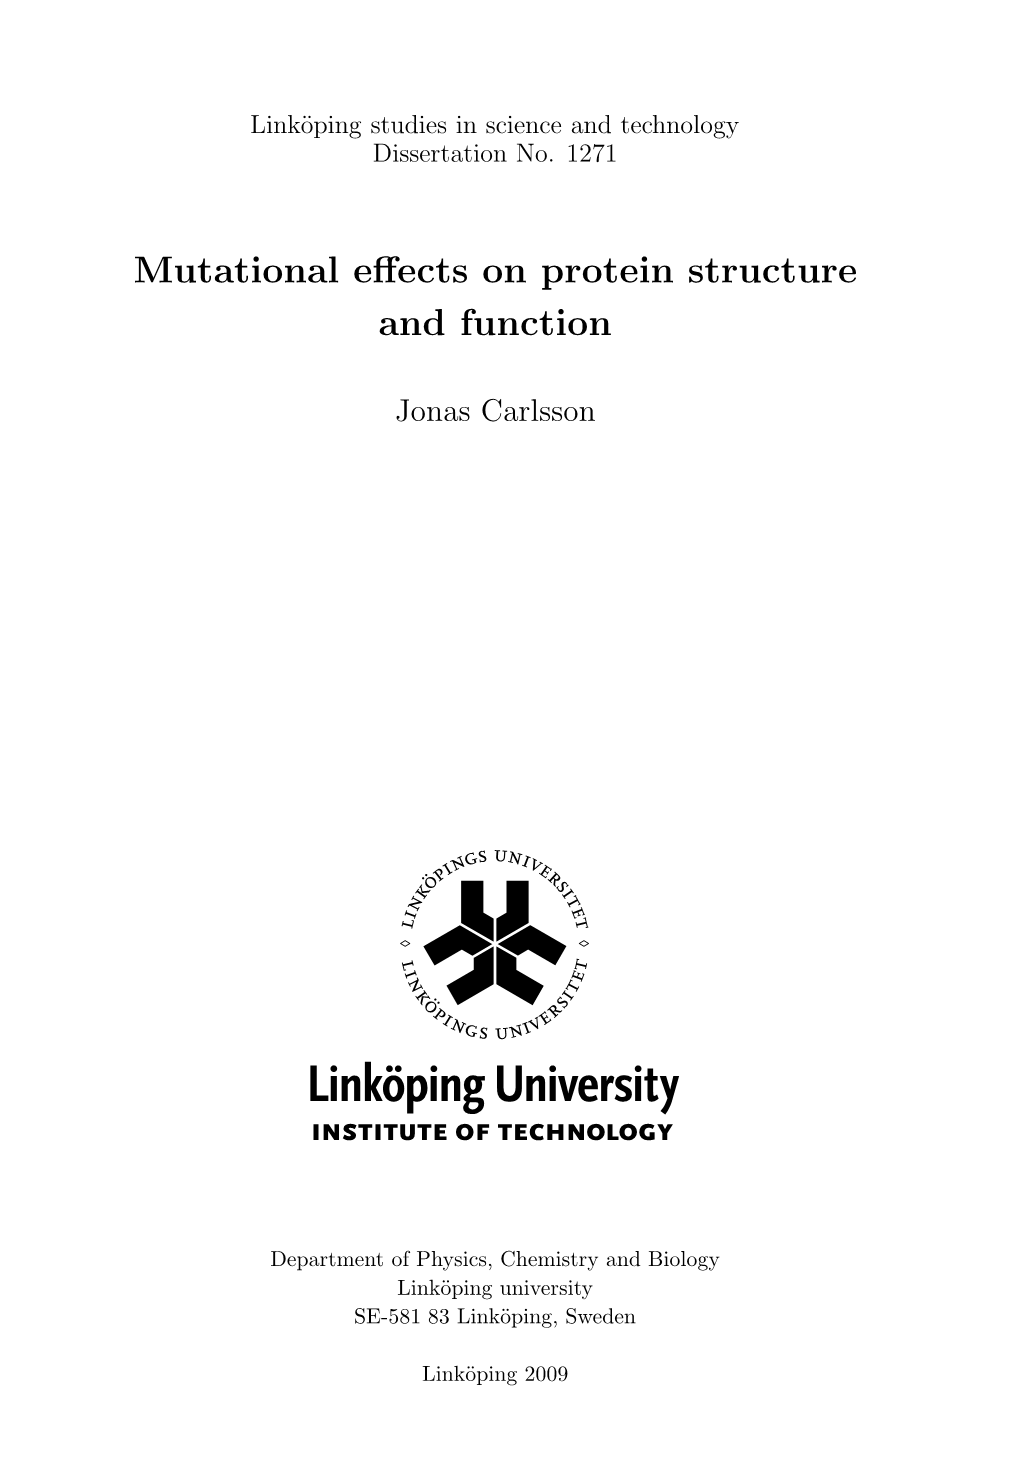 Mutational Effects on Protein Structure and Function